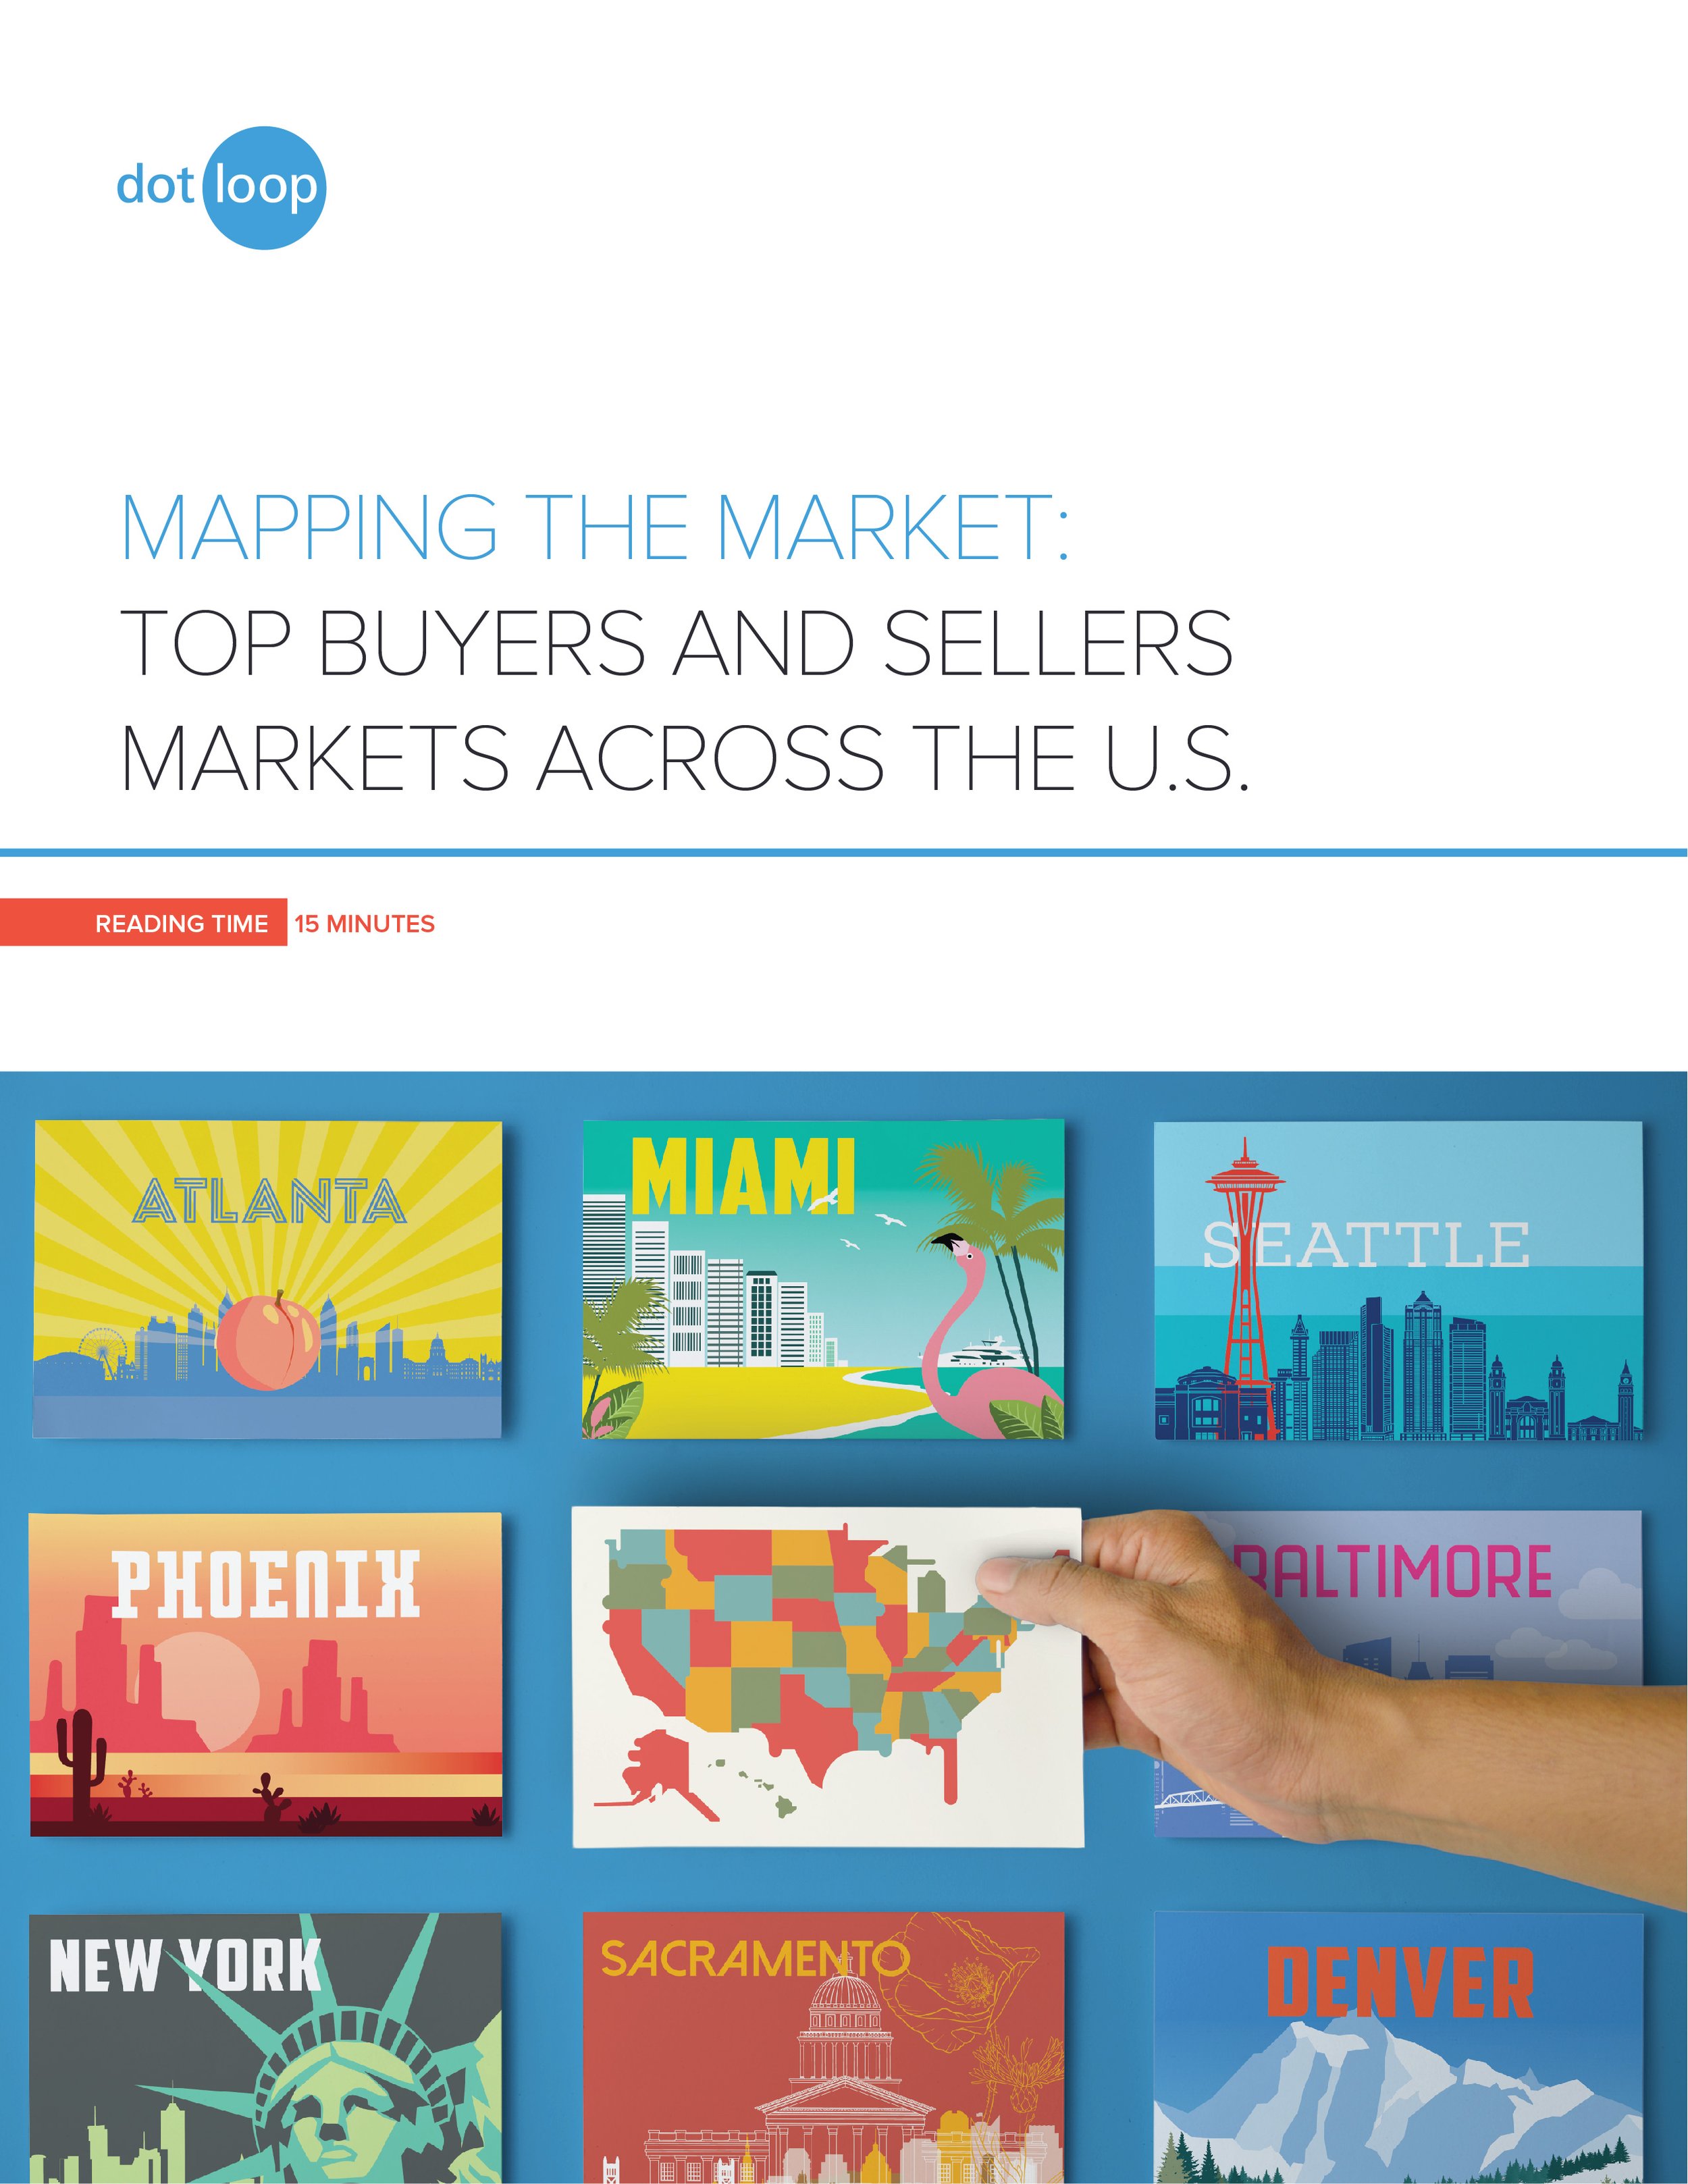 Mapping the Market ebook-01.jpg